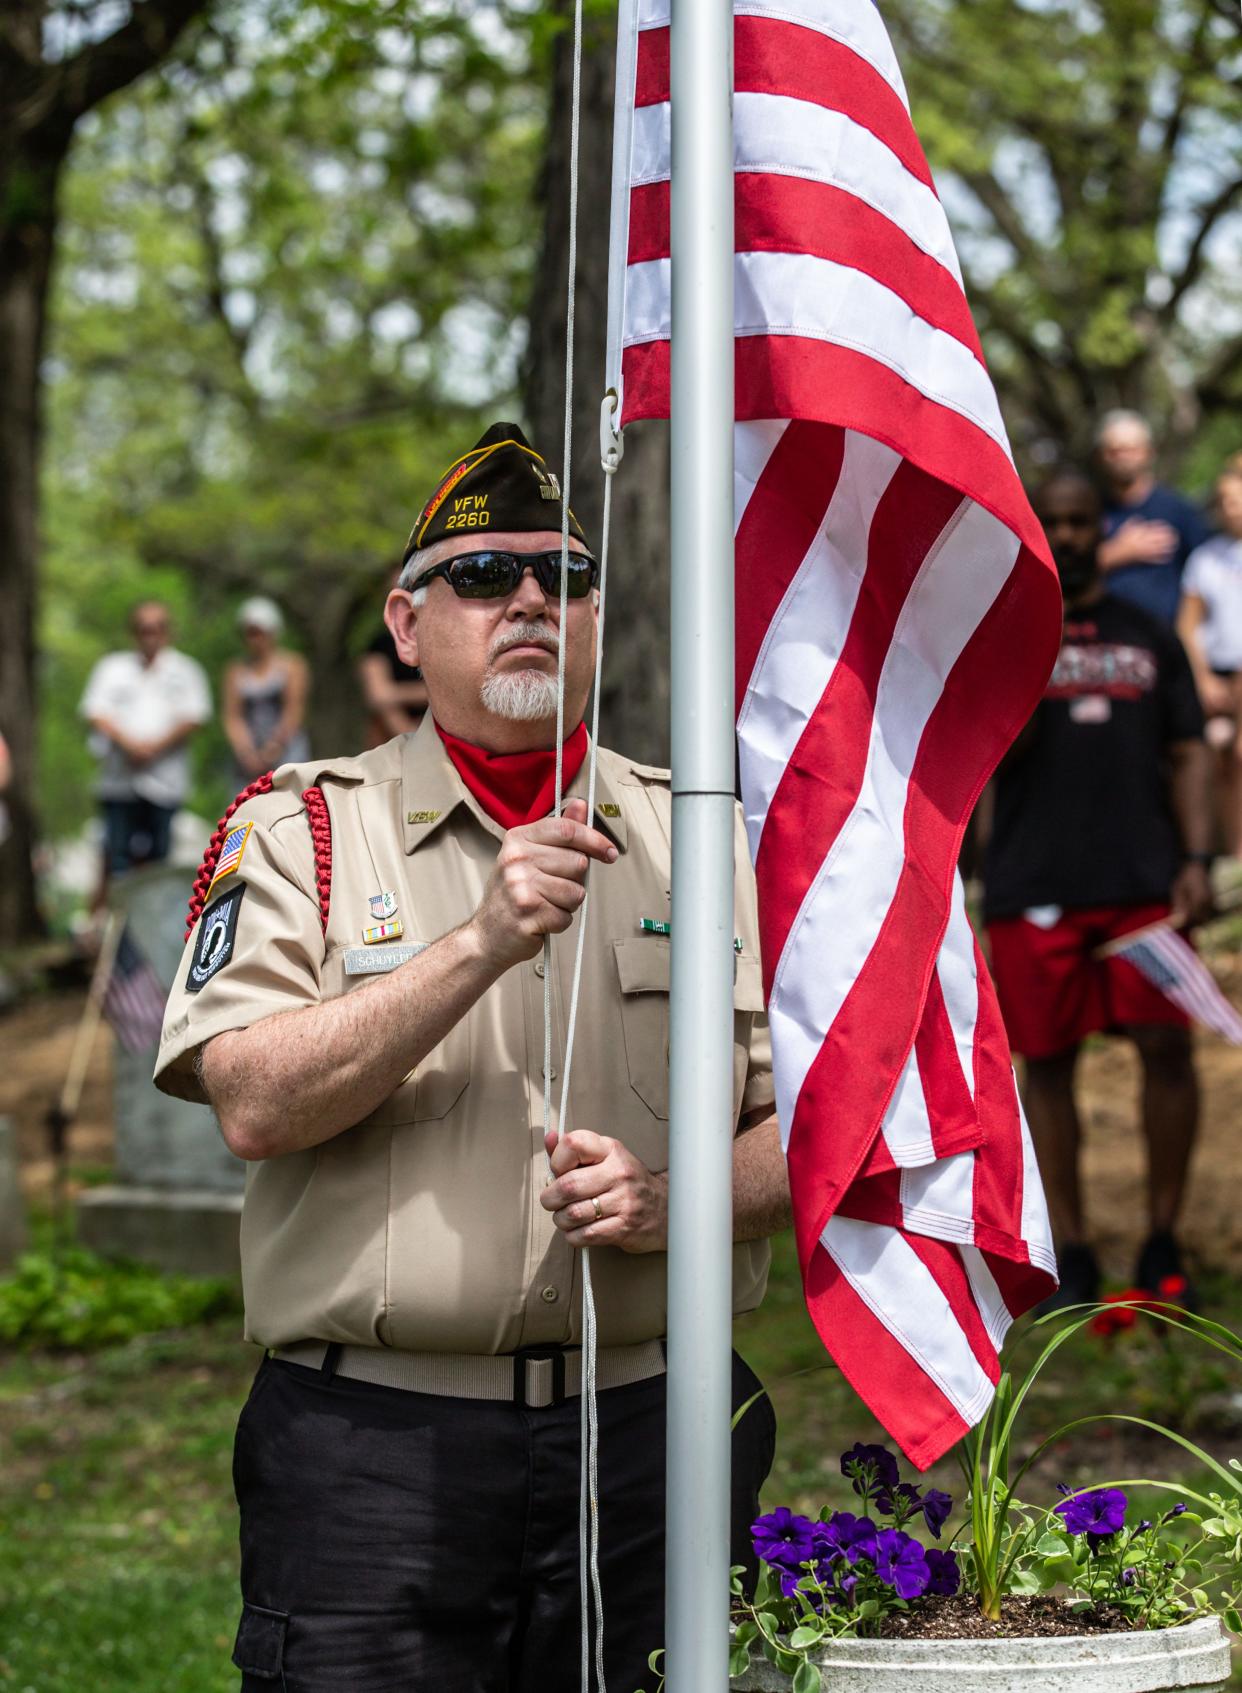 Chaplain Schuyler, of VFW Post 2260 in Oconomowoc, raises the flag from half-staff during the Memorial Day Remembrance ceremony at La Belle Cemetery on Monday, May 25, 2020.